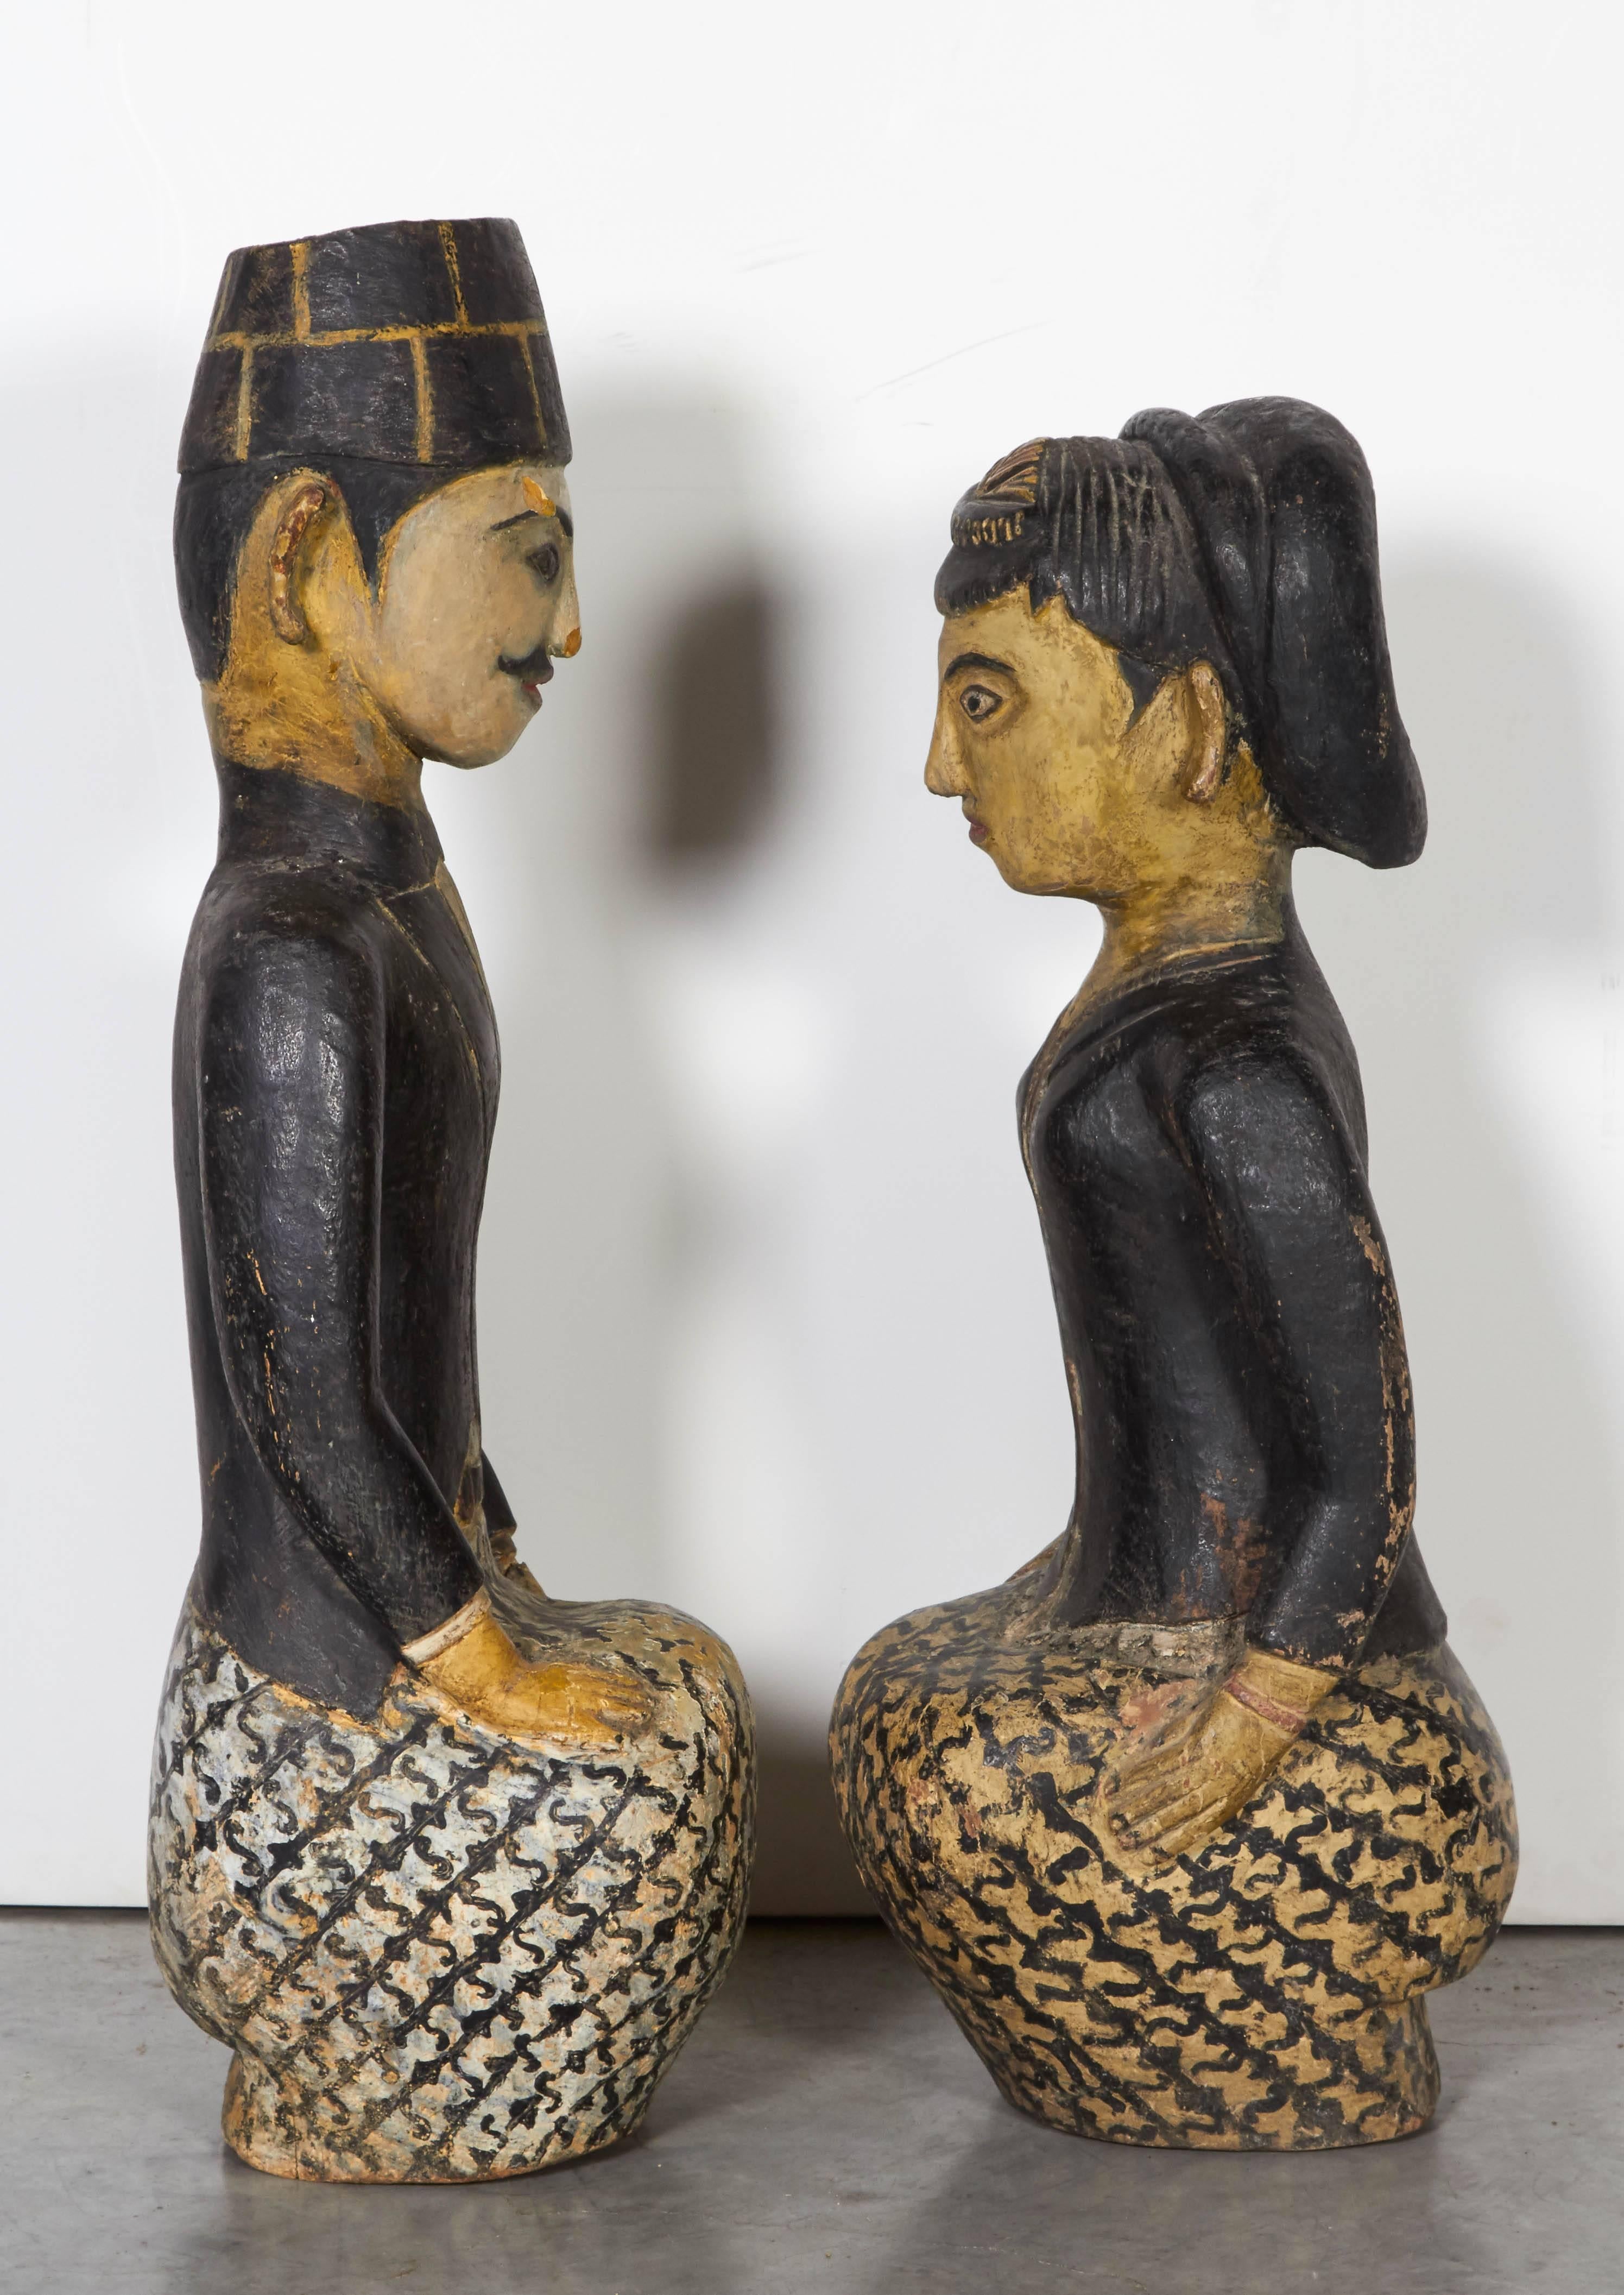 Expertly carved and sensitively painted antique Loro Blonyo figures from Java, Indonesia. These pieces represent the 